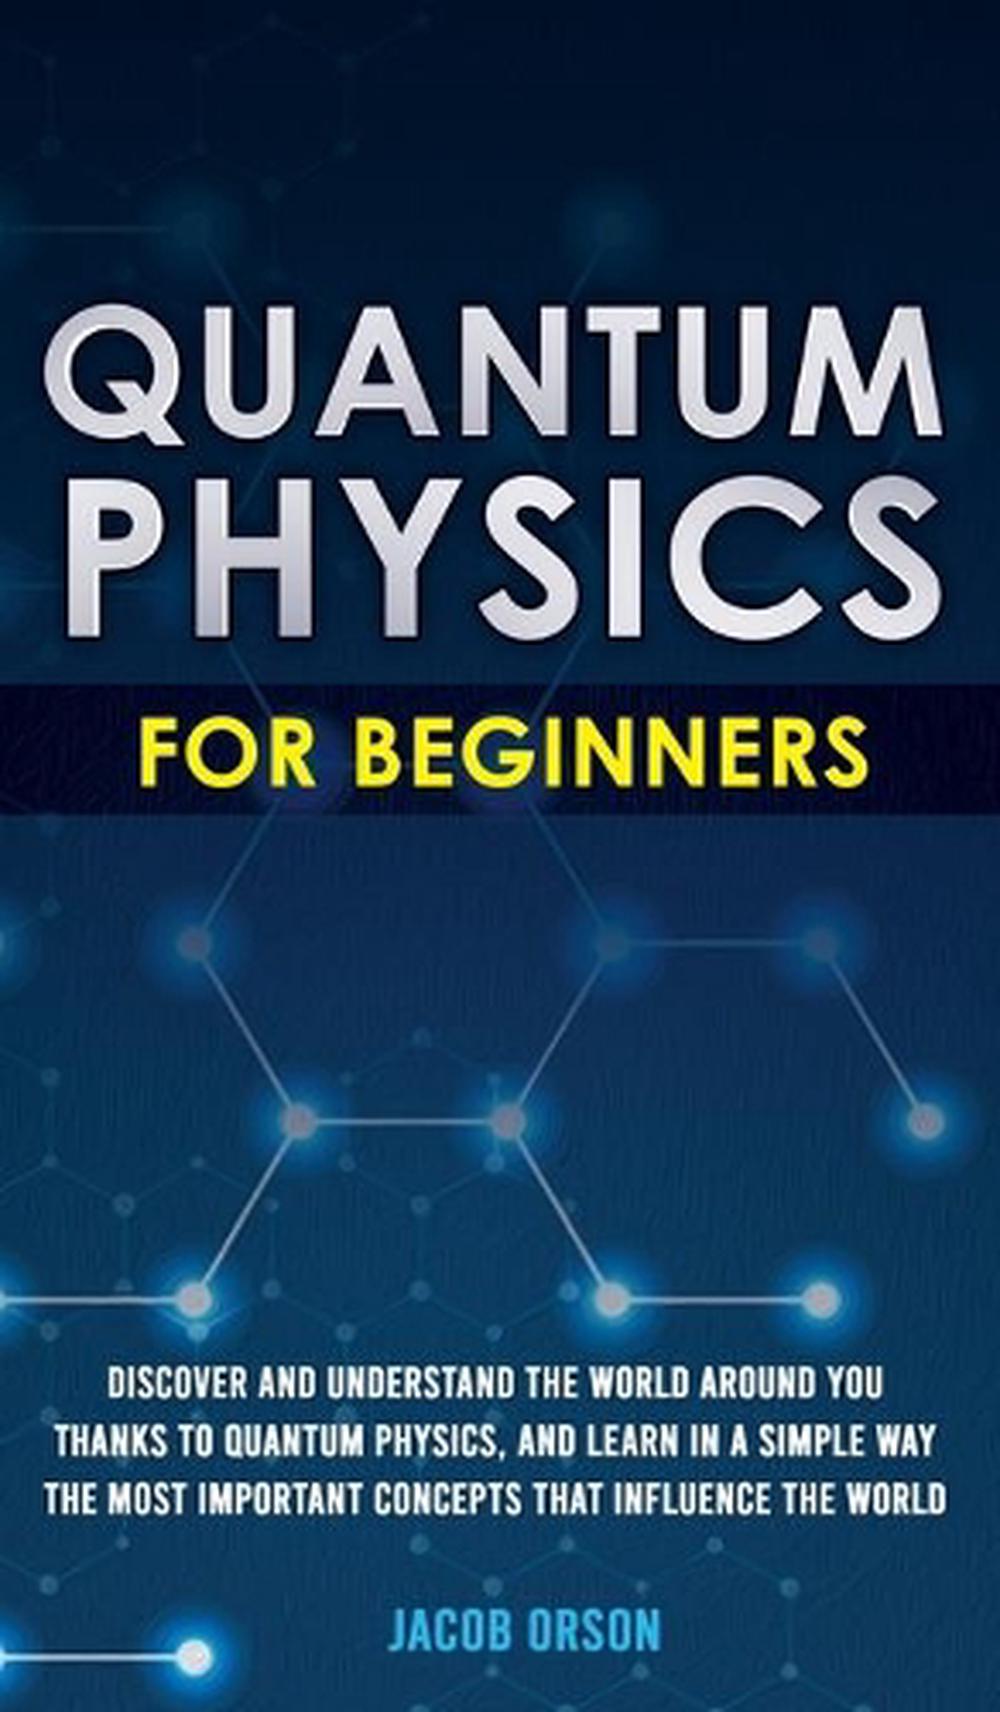 Quantum Physics for Beginners by Orson Jacob Orson (English) Hardcover